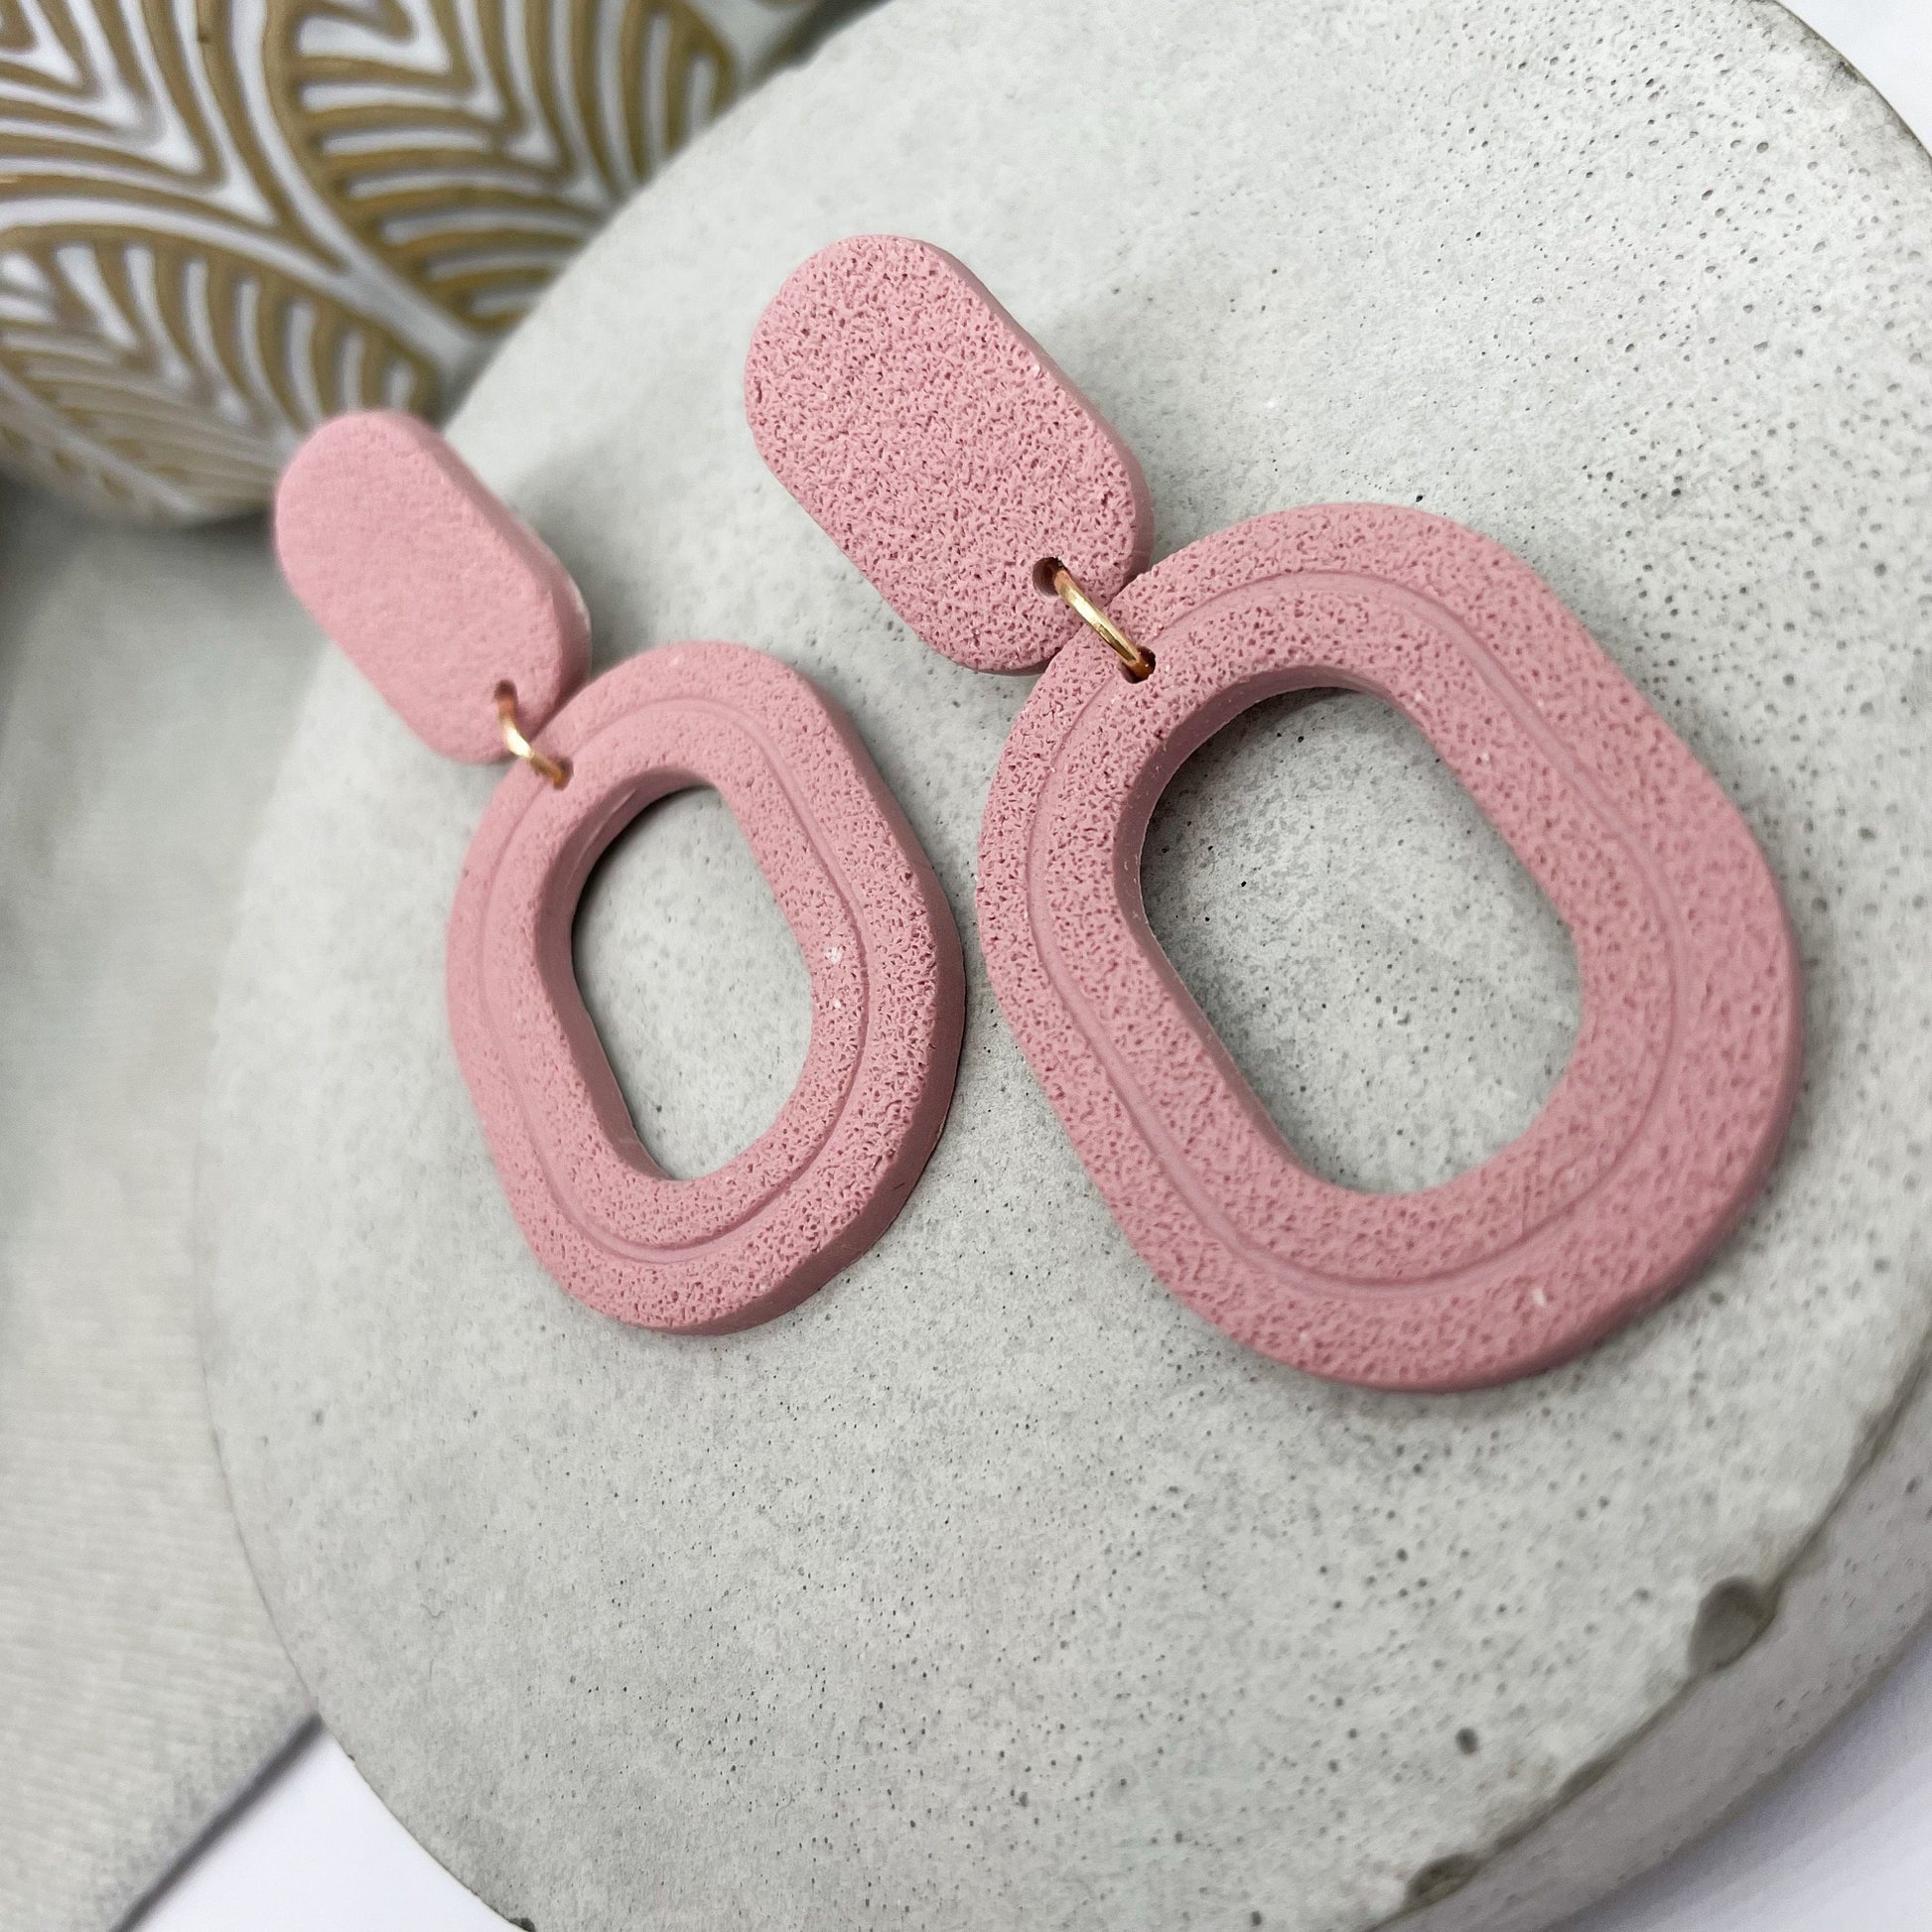 Polymer clay earrings pink, textured clay earrings, galentine gift, post box gift, best friend birthday gift, valentines girlfriend gift,